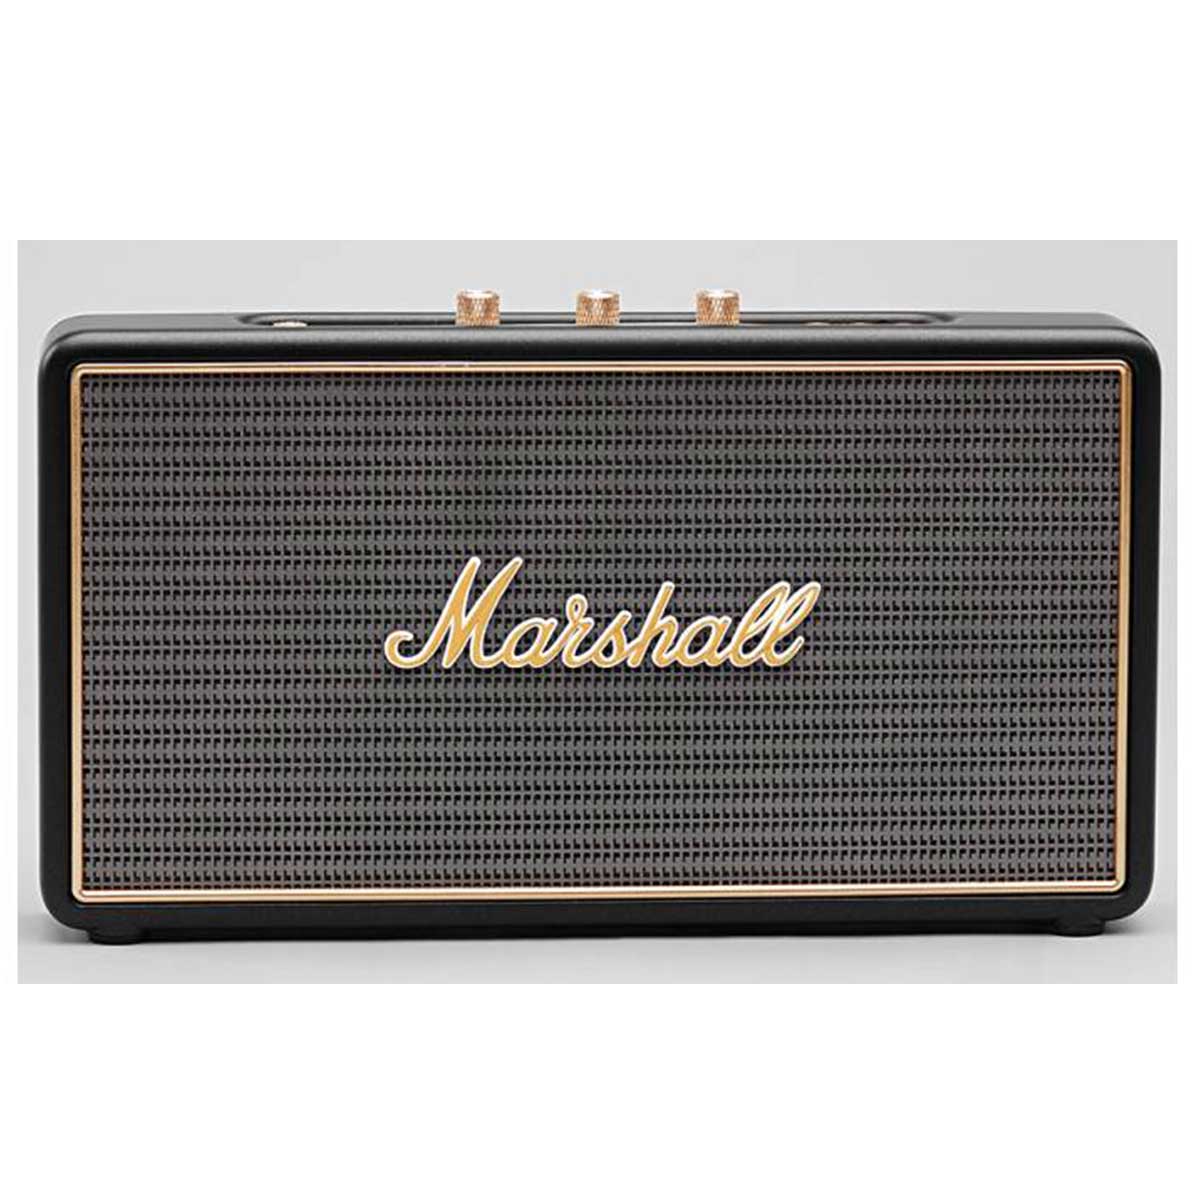 Marshall - Stockwell II Portable Bluetooth Speaker with Case